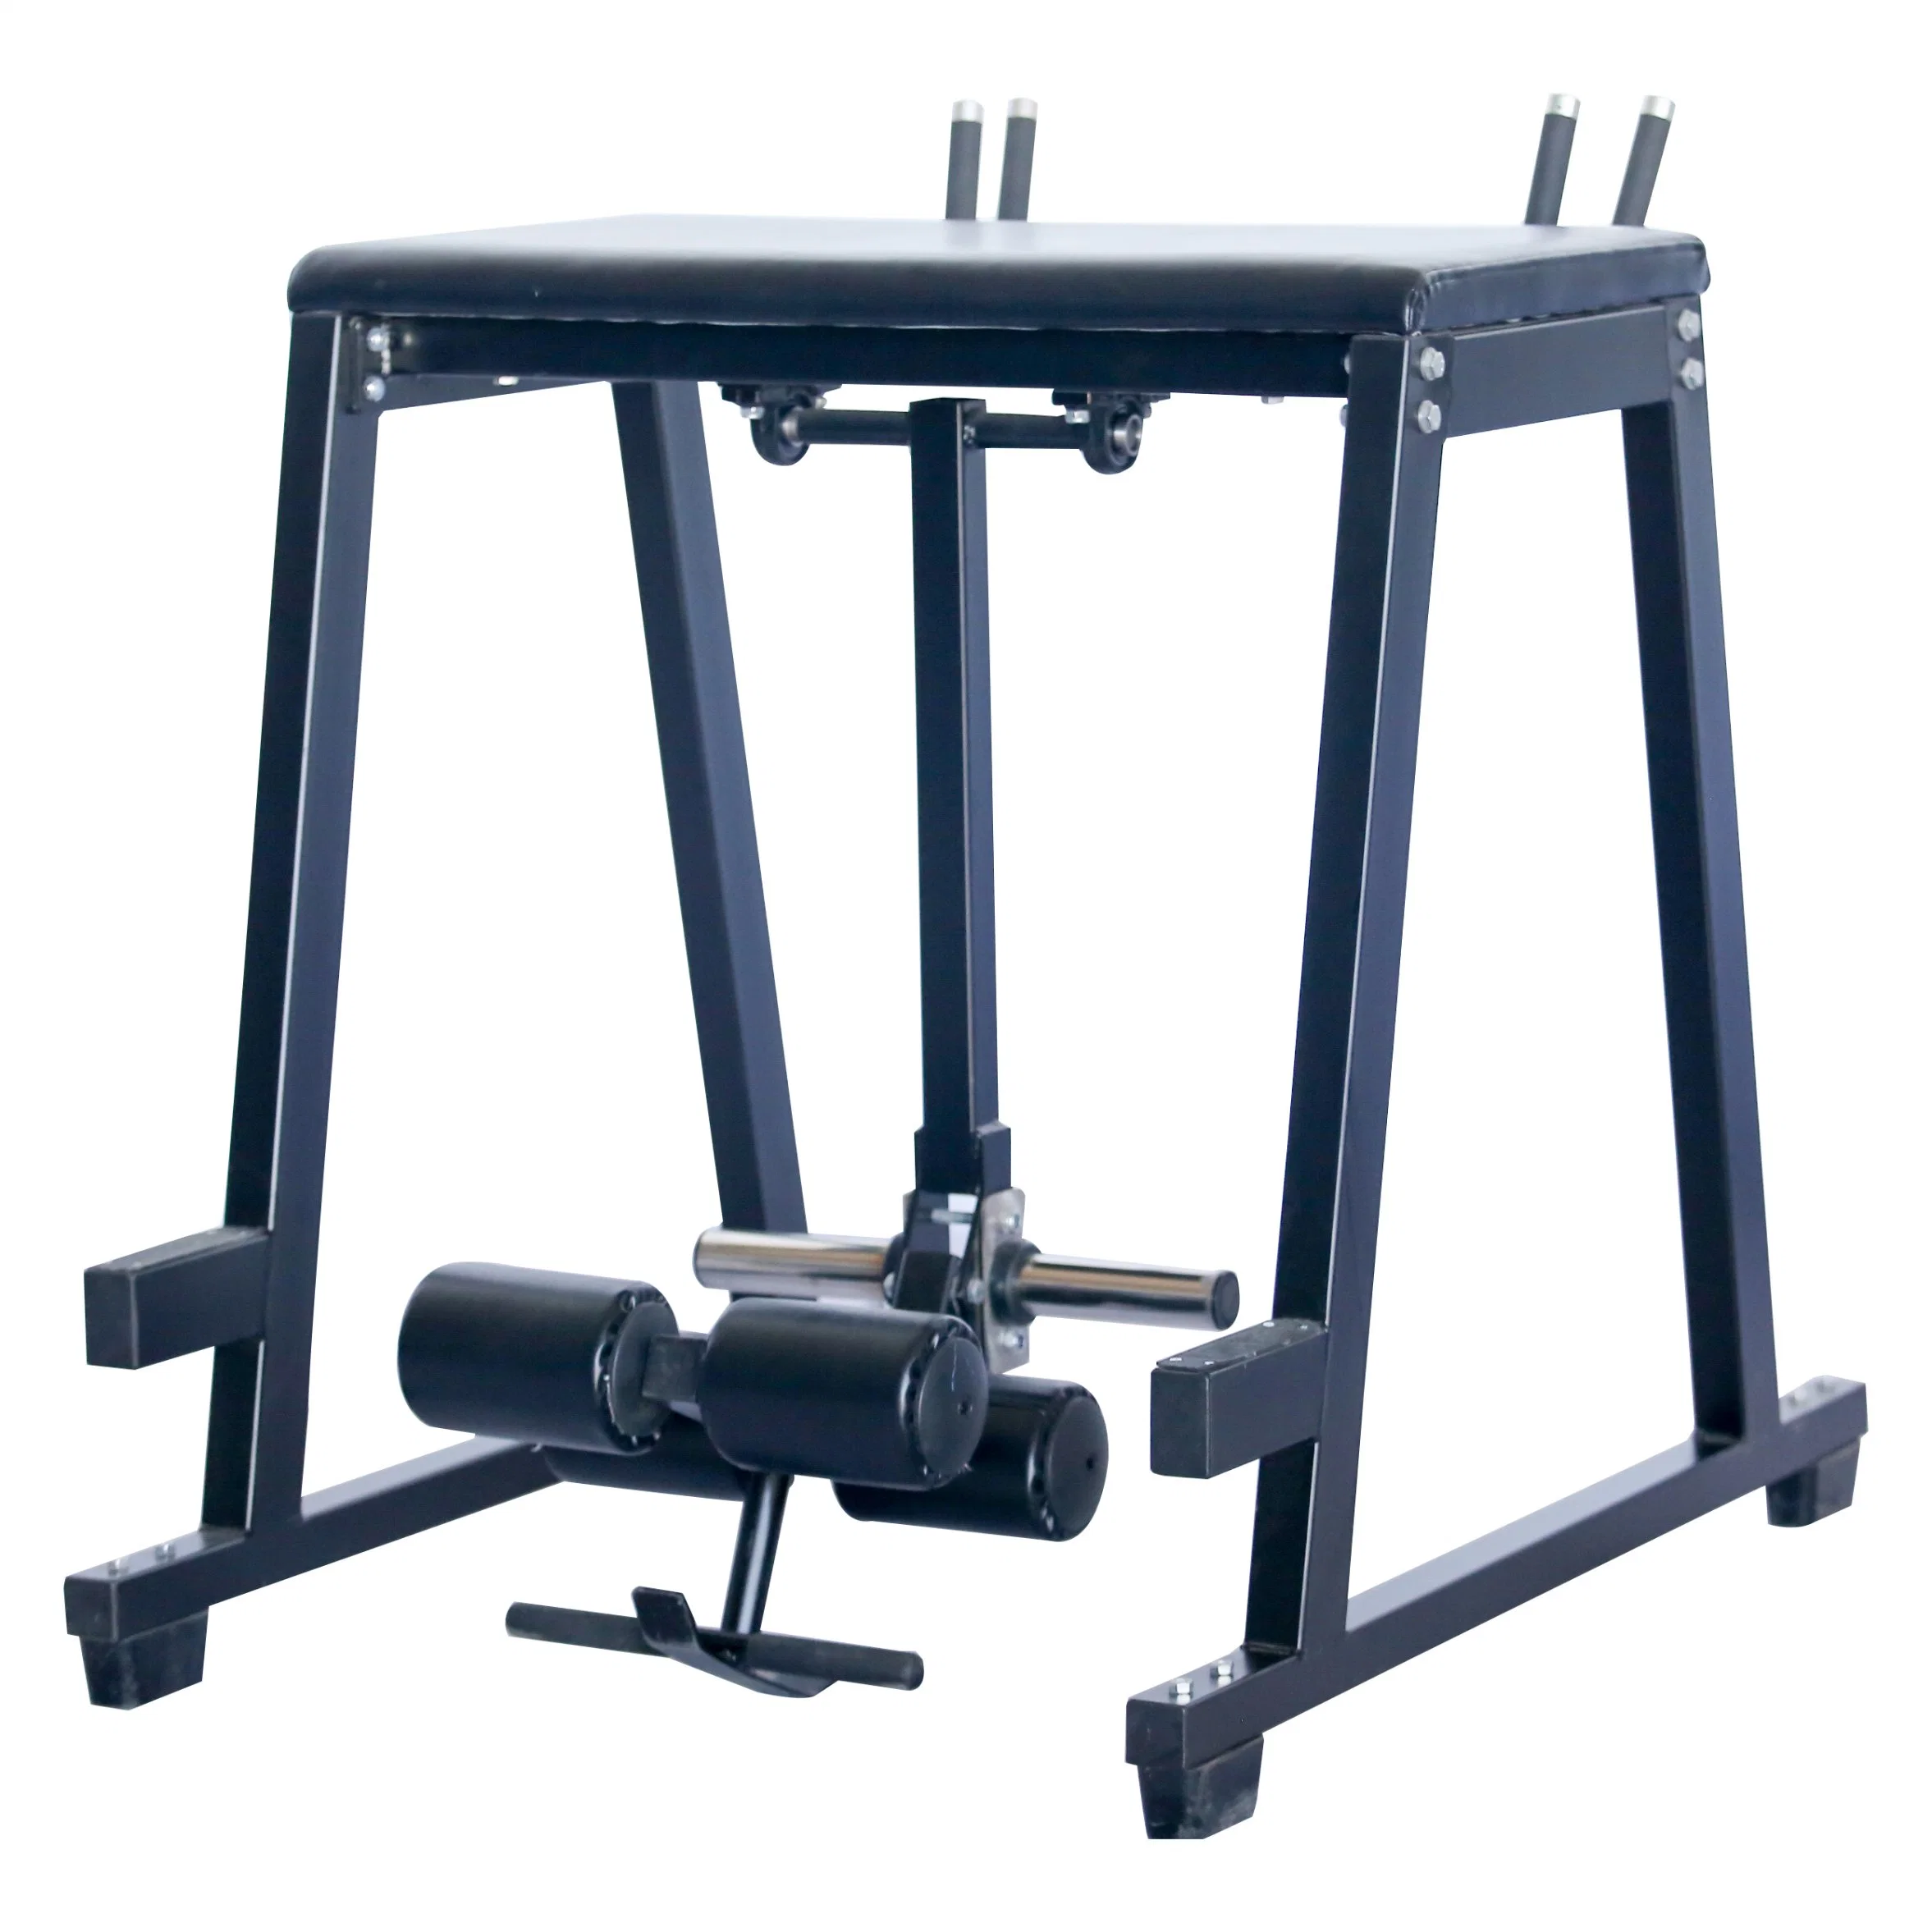 Plate Loaded Commercial Gym Fitness Equipment Free Weight Machine Prone Straight Leg Swing Machine